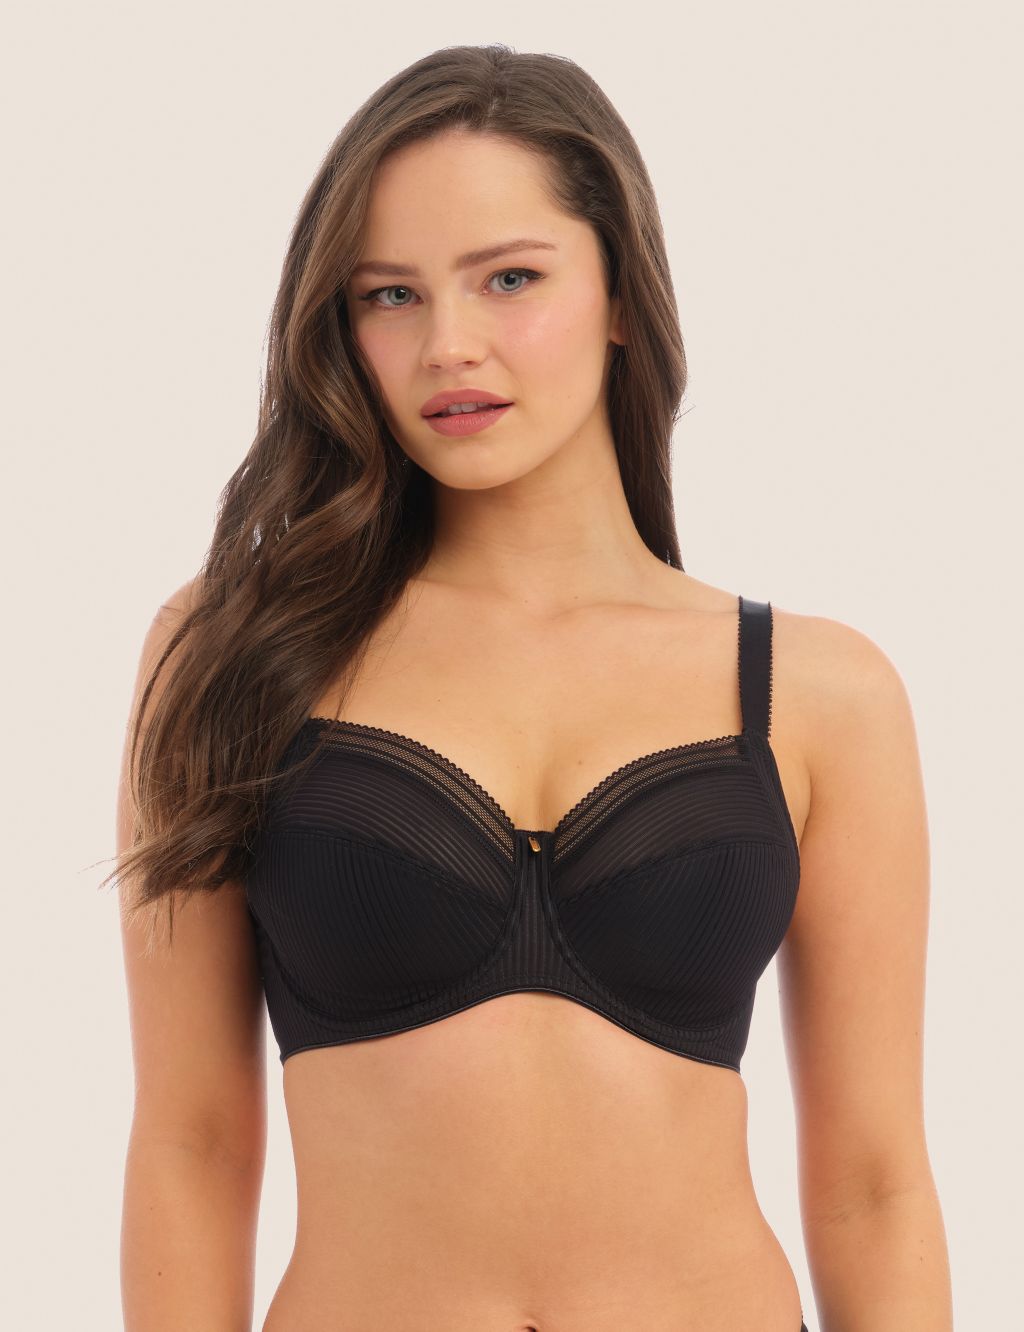 Fantasie Fusion Underwired Full Cup Side Support Bra - Black - Curvy